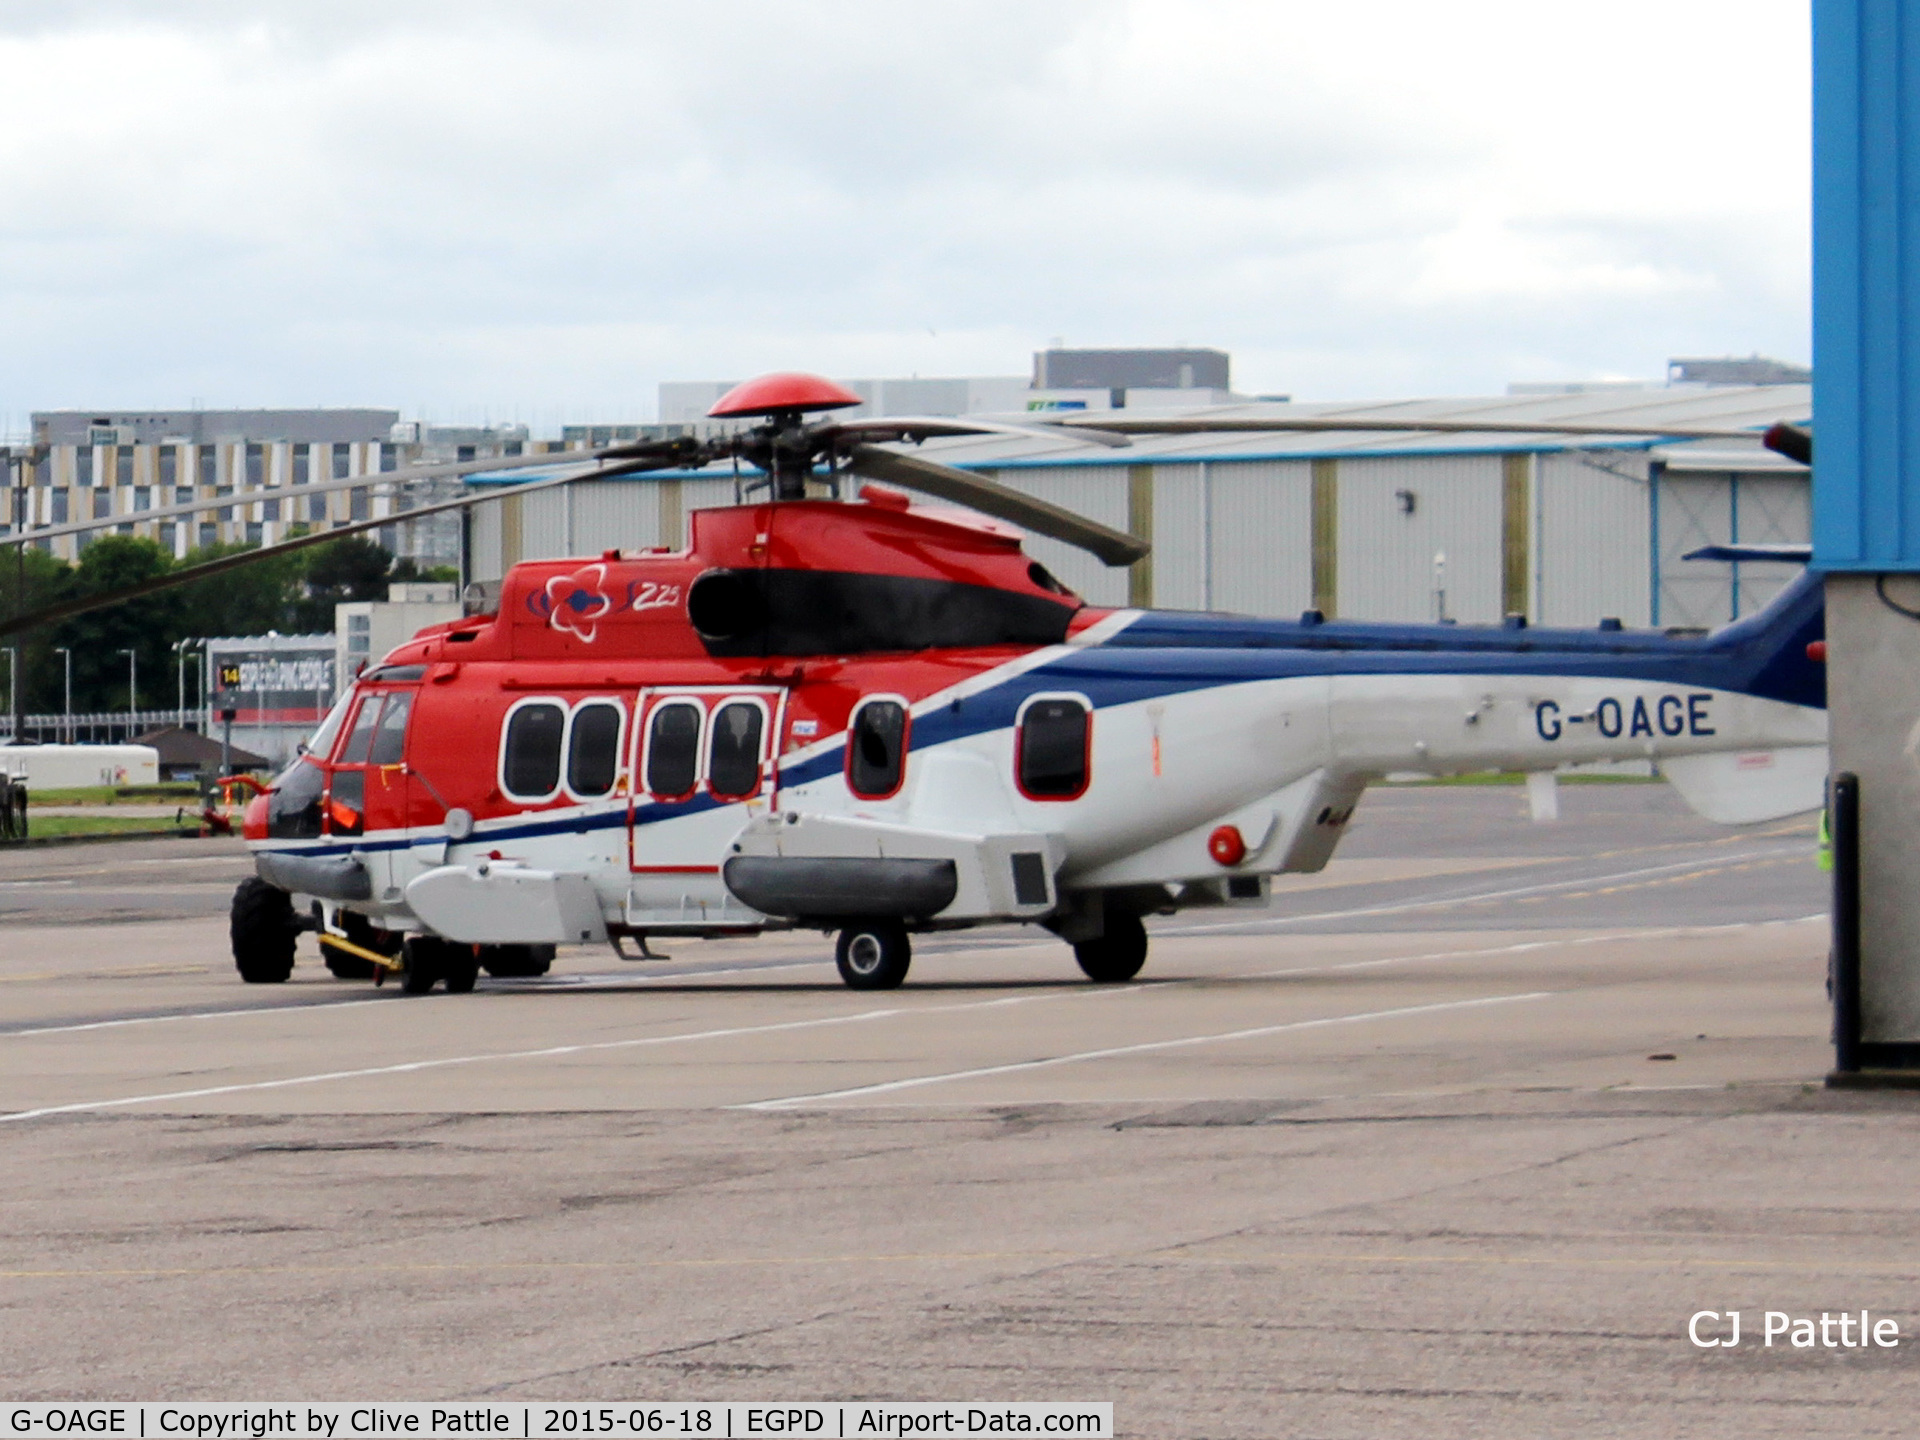 G-OAGE, 2014 Airbus Helicopters EC-225LP Super Puma Mk2+ C/N 2949, Under tow at Aberdeen Airport, Scotland EGPD